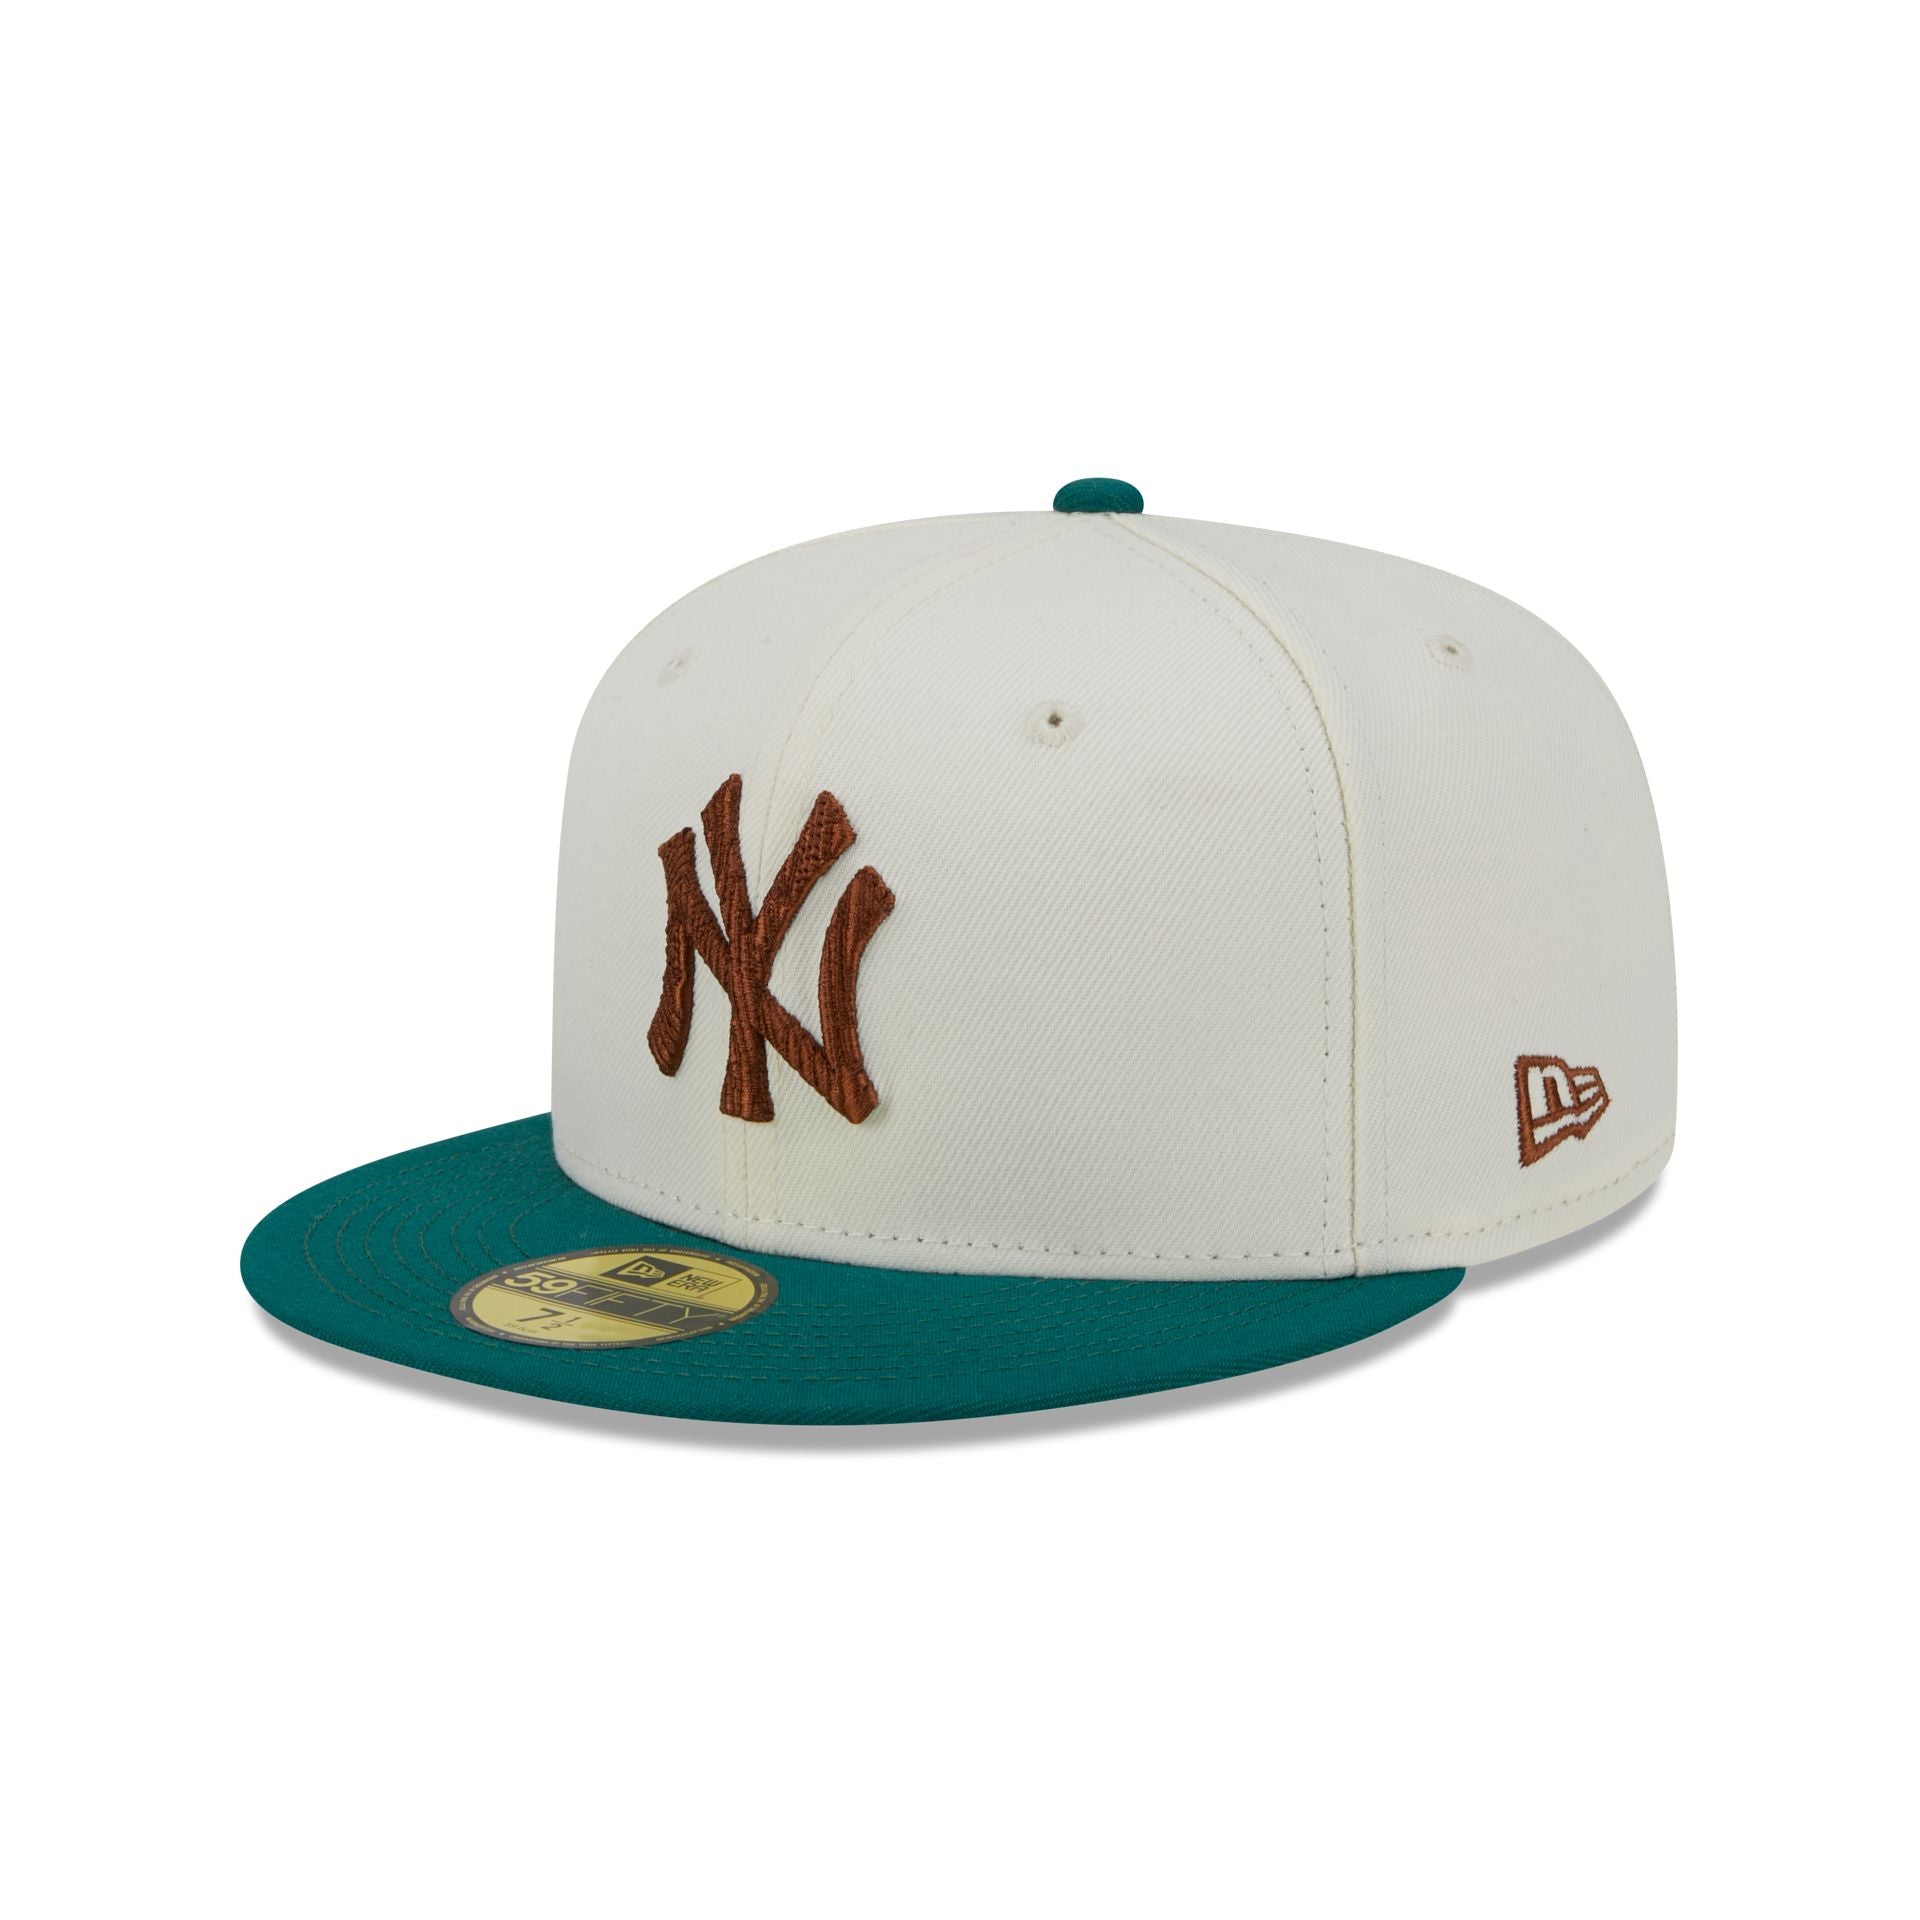 New Cap Yankees Hat Camp – Era York Fitted New 59FIFTY